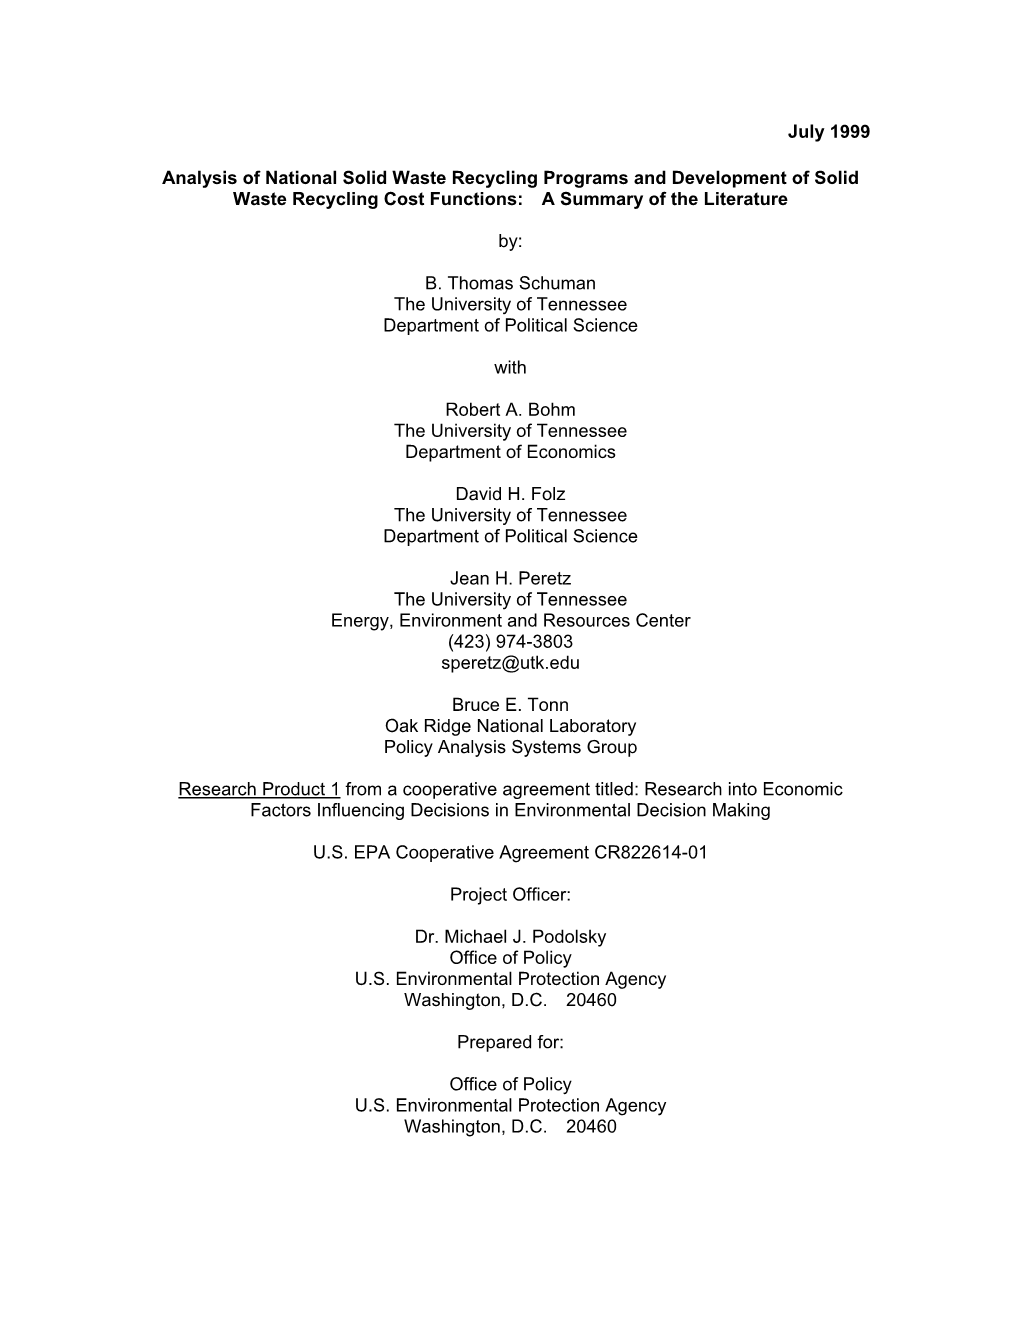 July 1999 Analysis of National Solid Waste Recycling Programs And